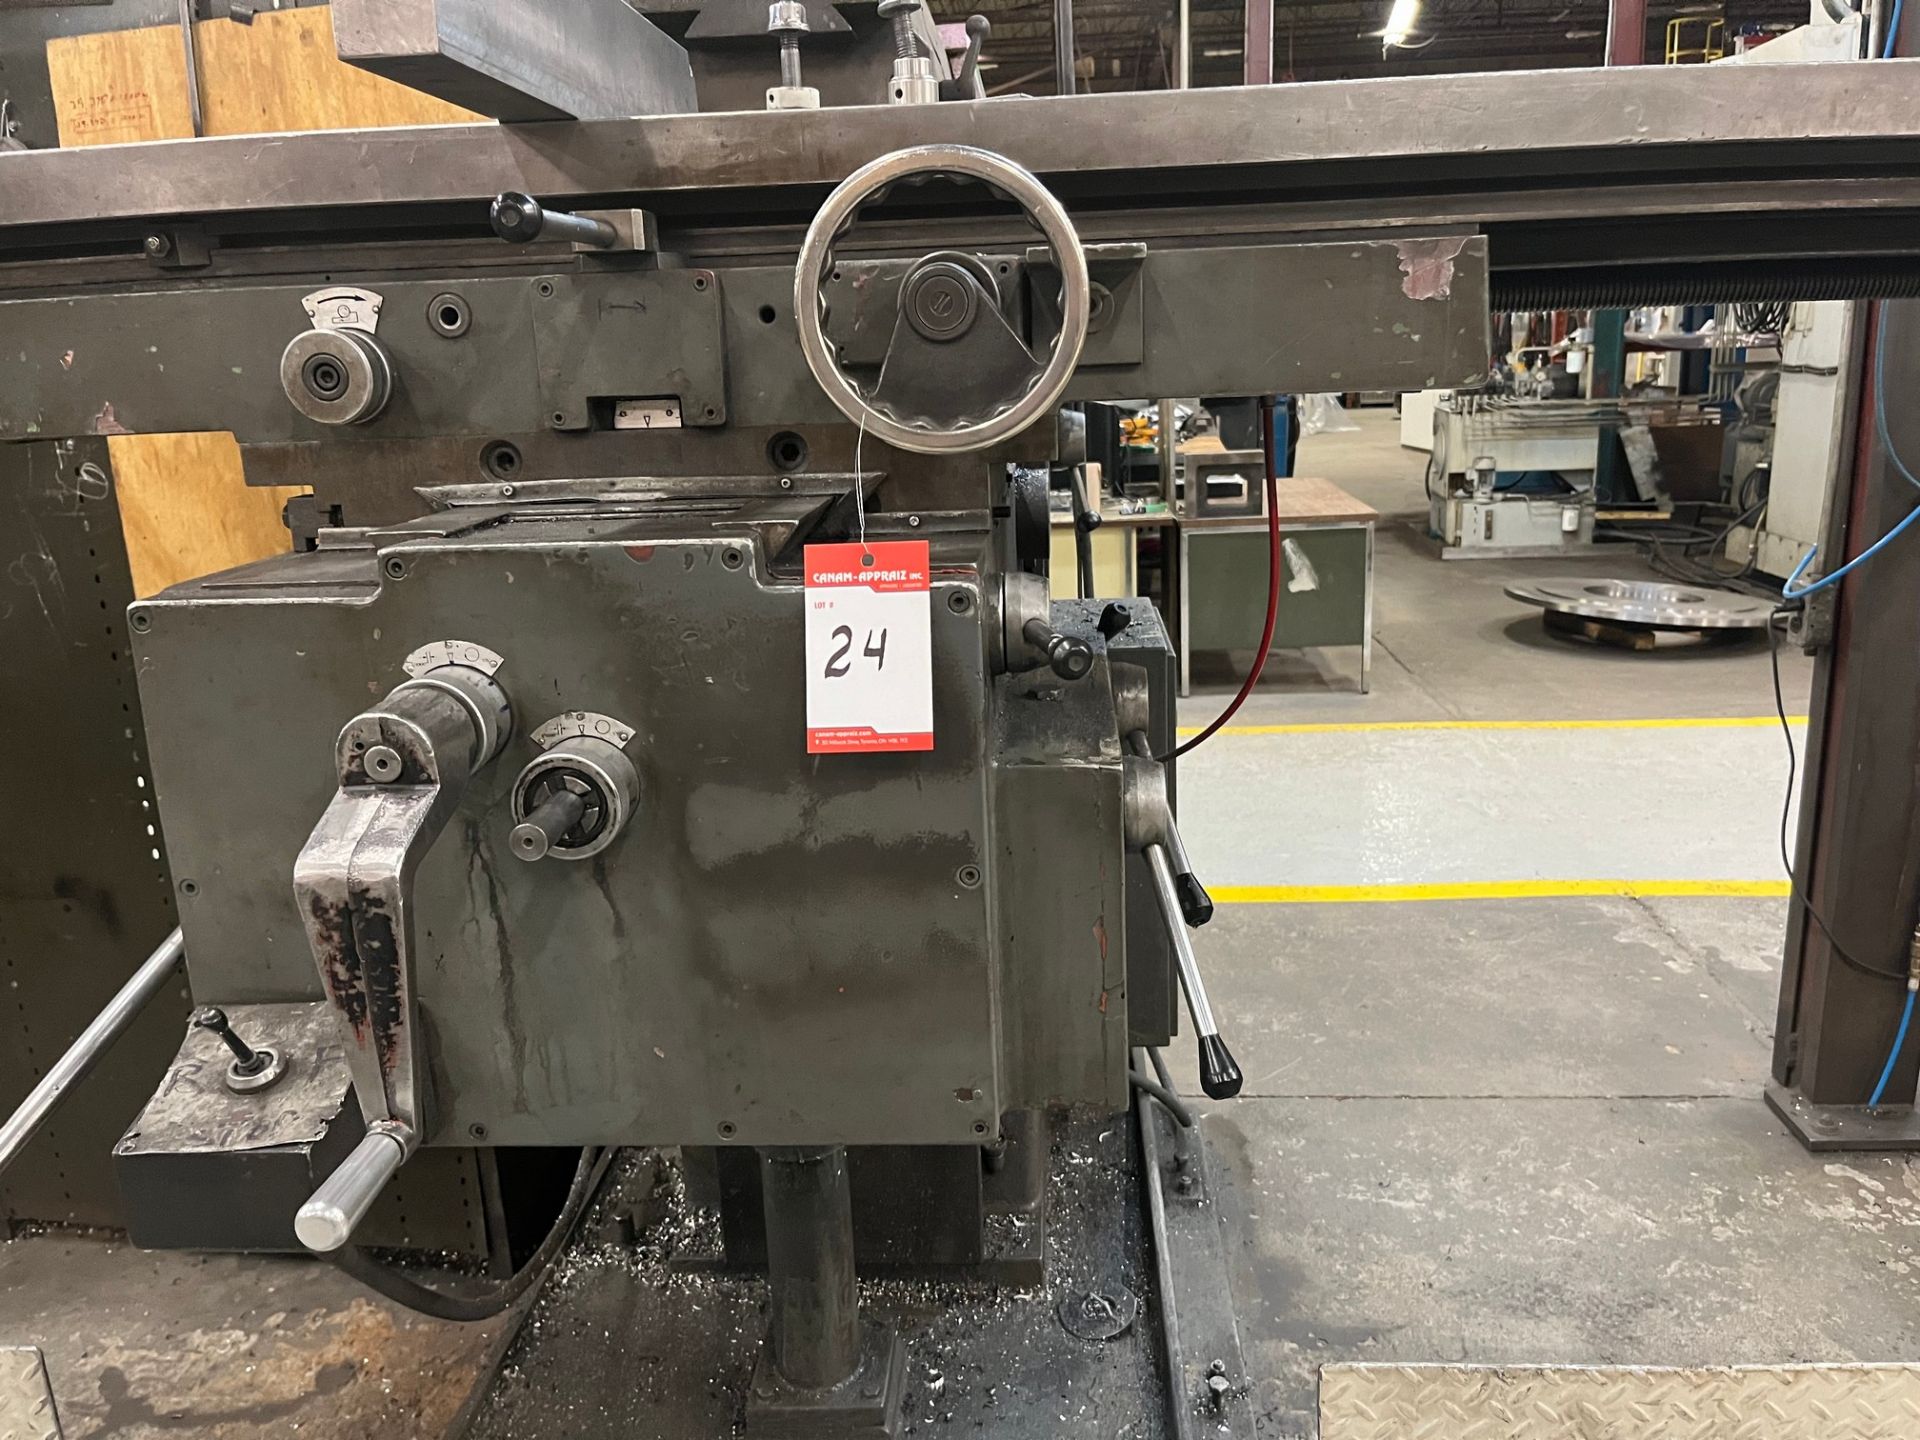 JARBE F4 UNIVERSAL MILLING MACHINE, 15” X 75” TABLE, 50 NMT SPINDLE, 36 – 1,800 RPM, S/N J-F4-24 - Image 2 of 4